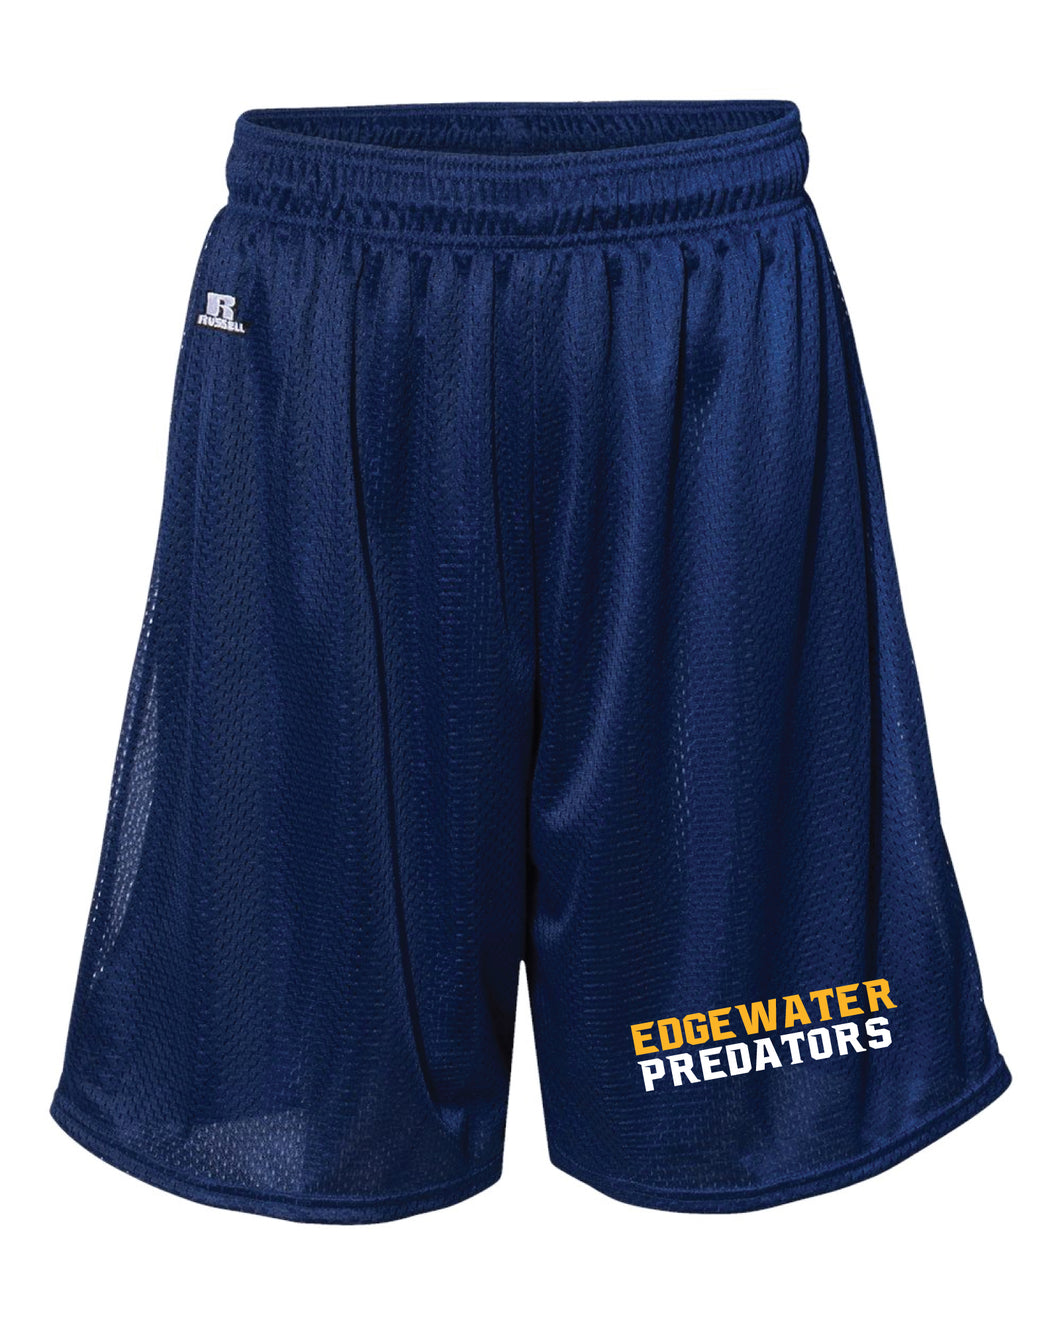 Edgewater Wrestling Russell Athletic Tech Shorts - Navy - 5KounT